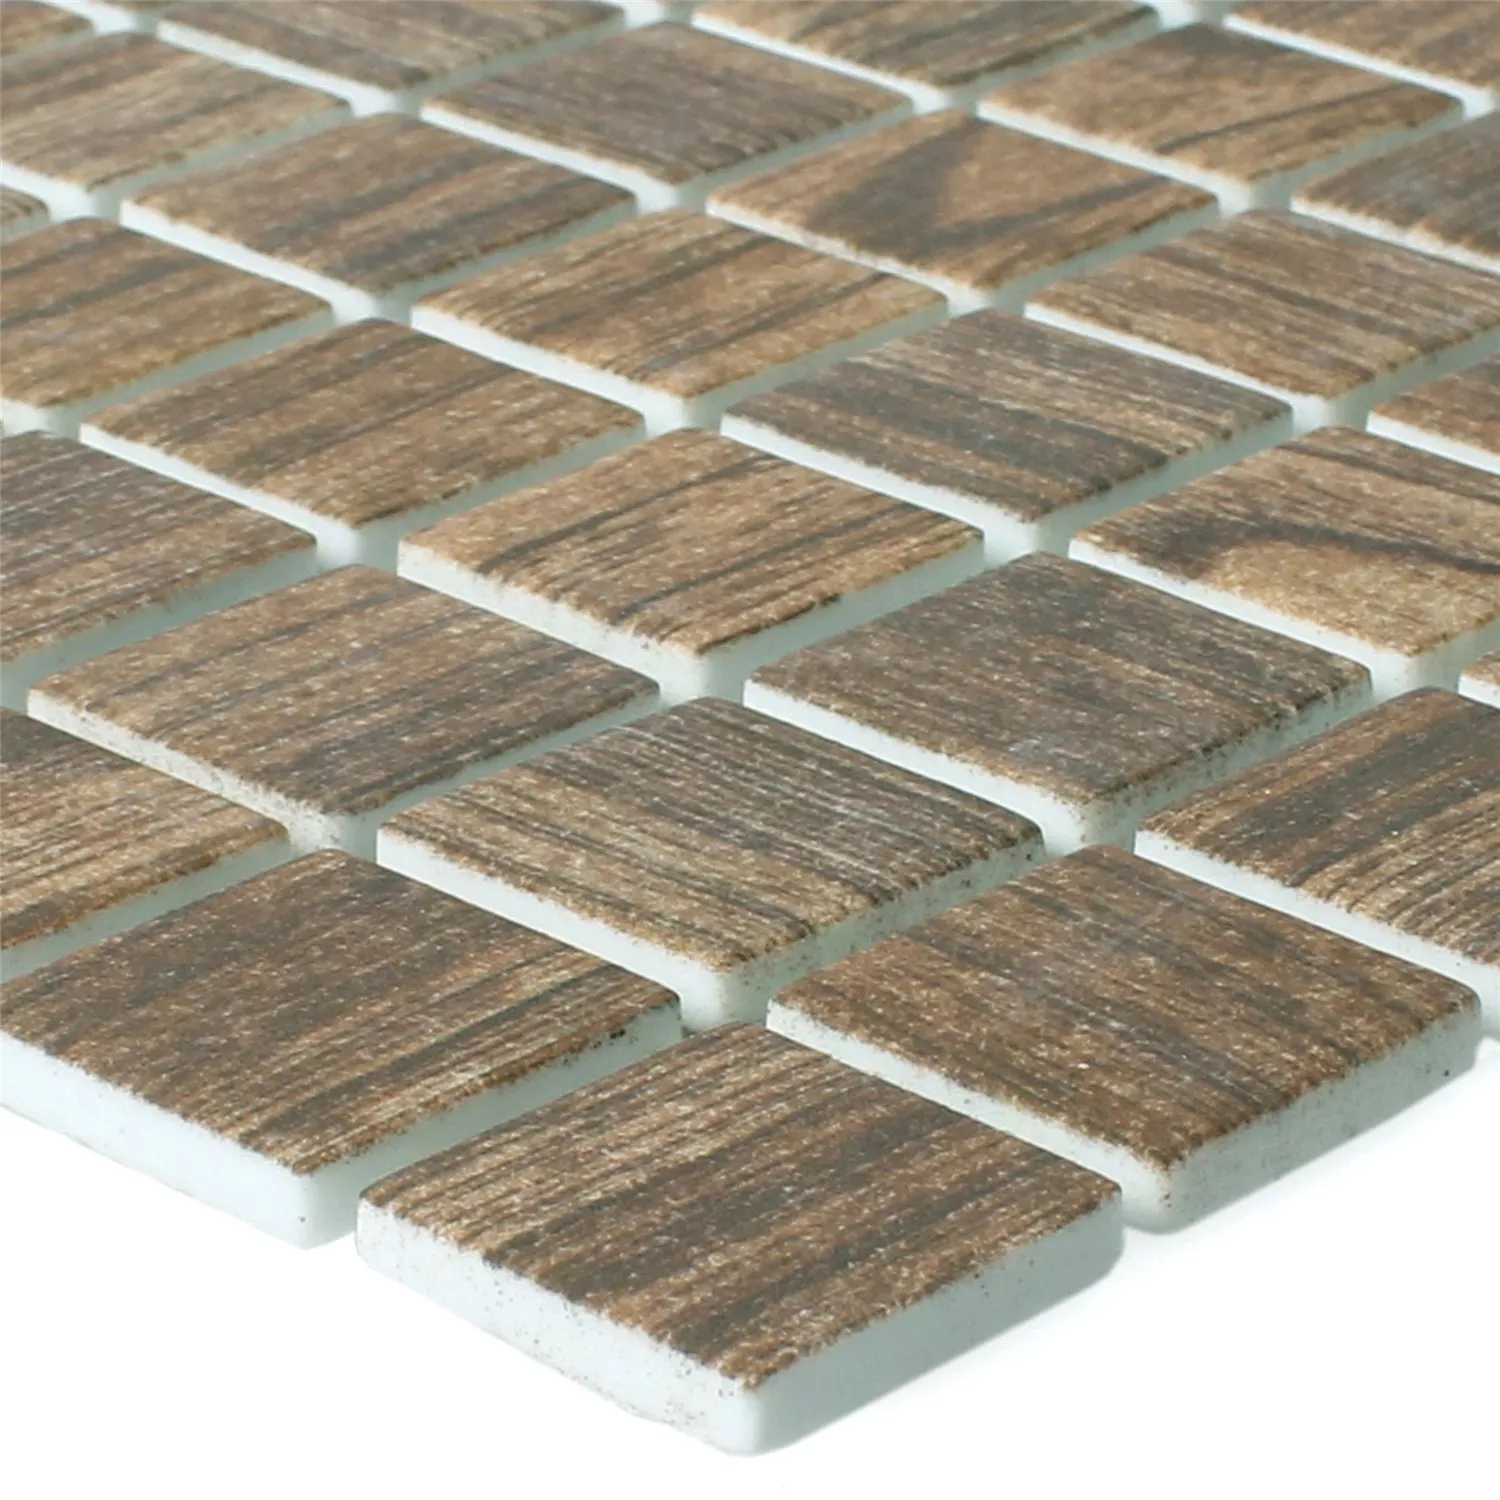 Mosaic Tiles Glass Valetta Wood Structure Brown